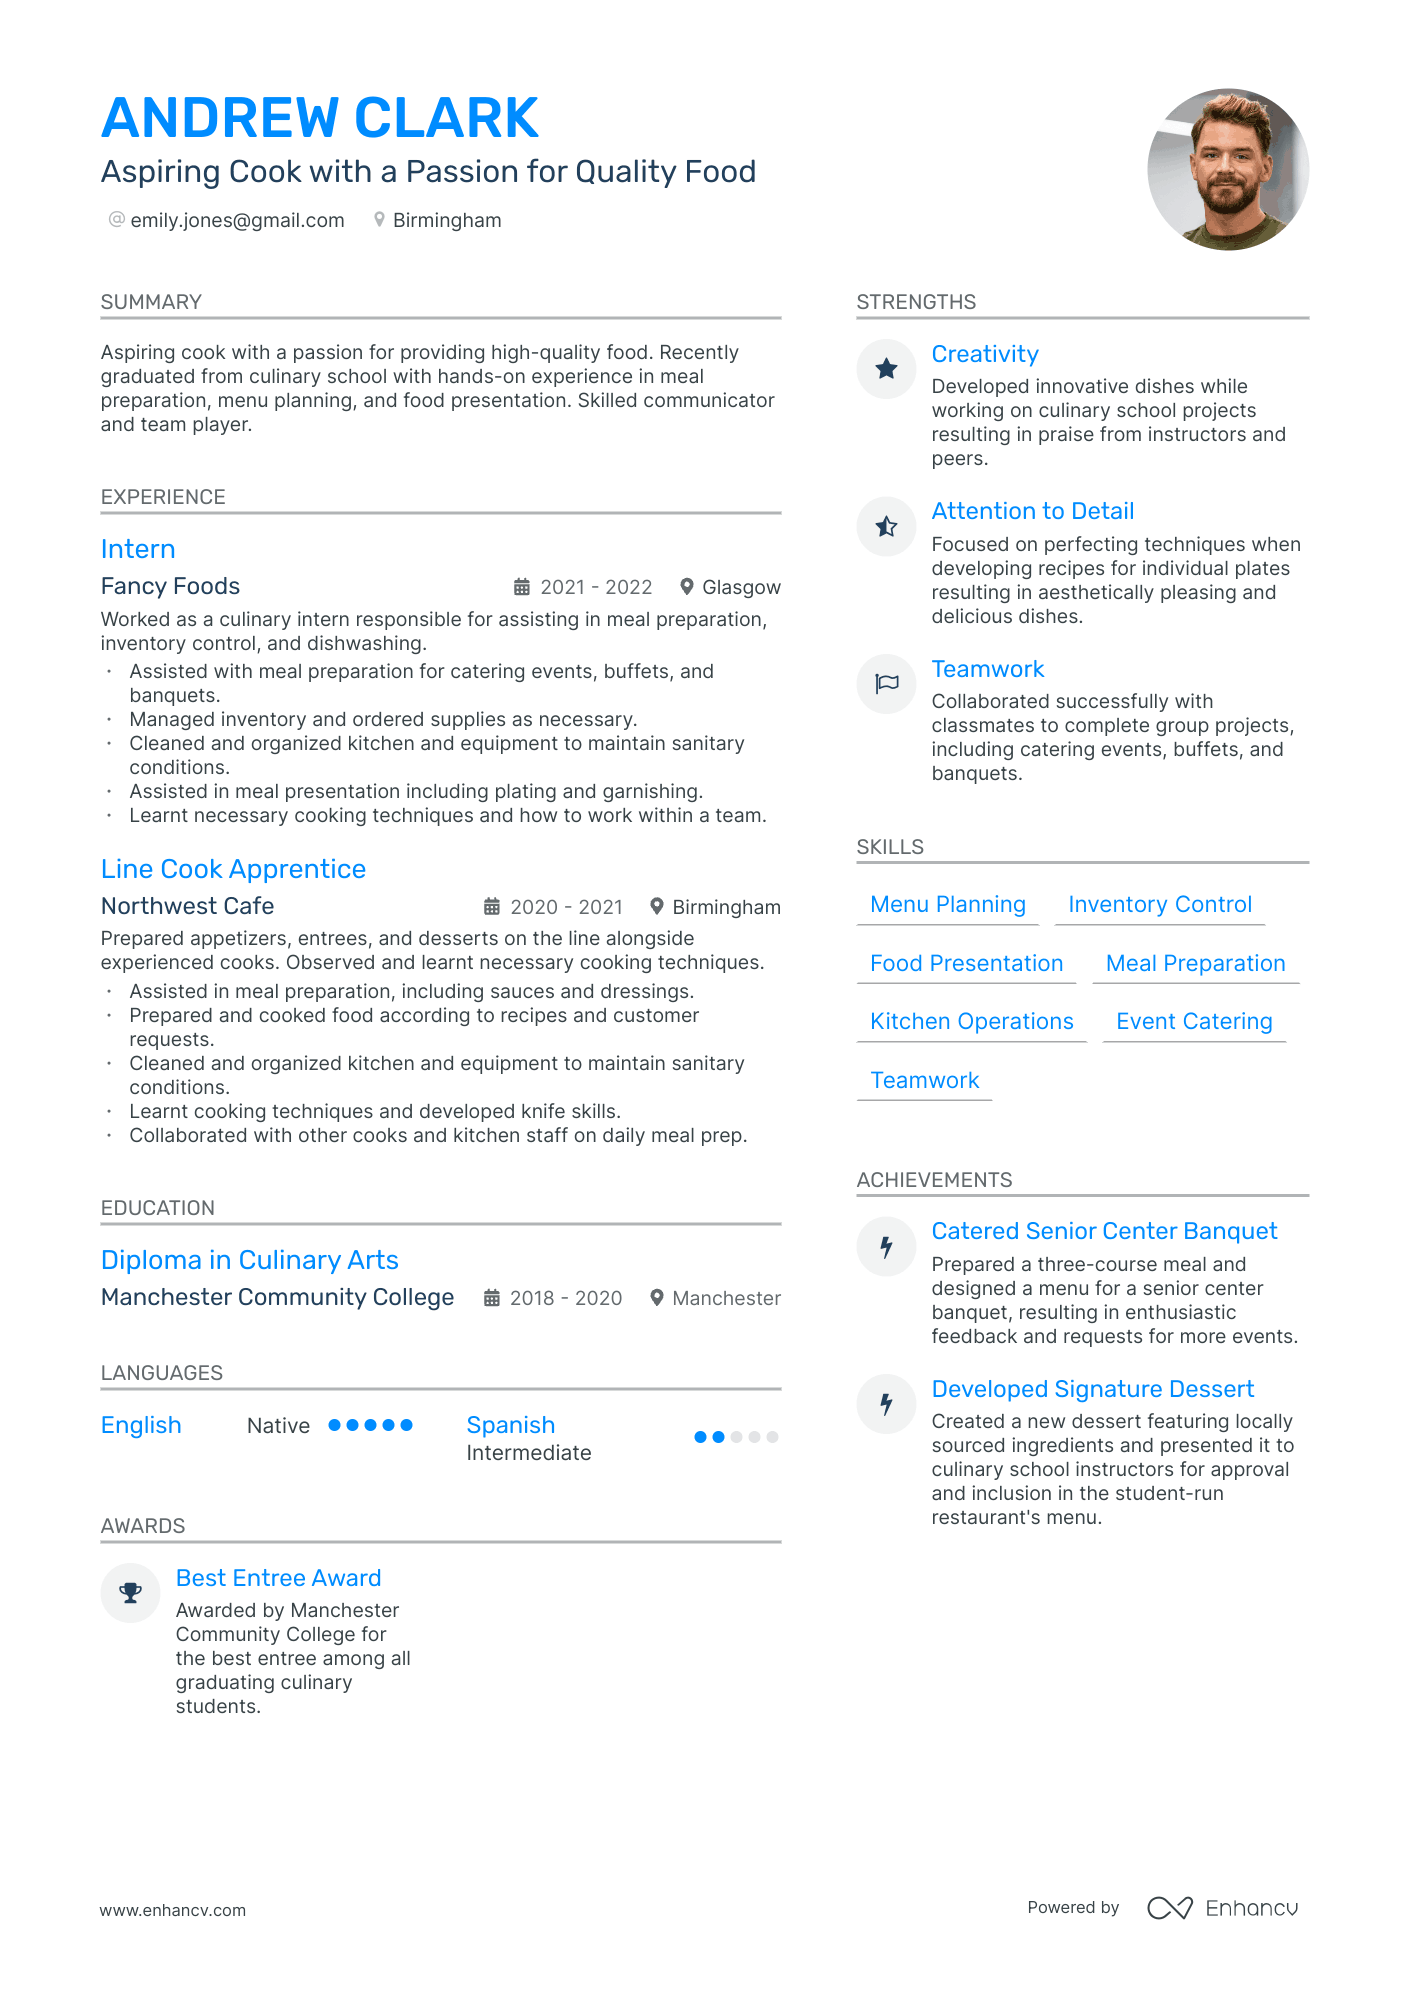 Aspiring Cook with a Passion for Quality Food CV example